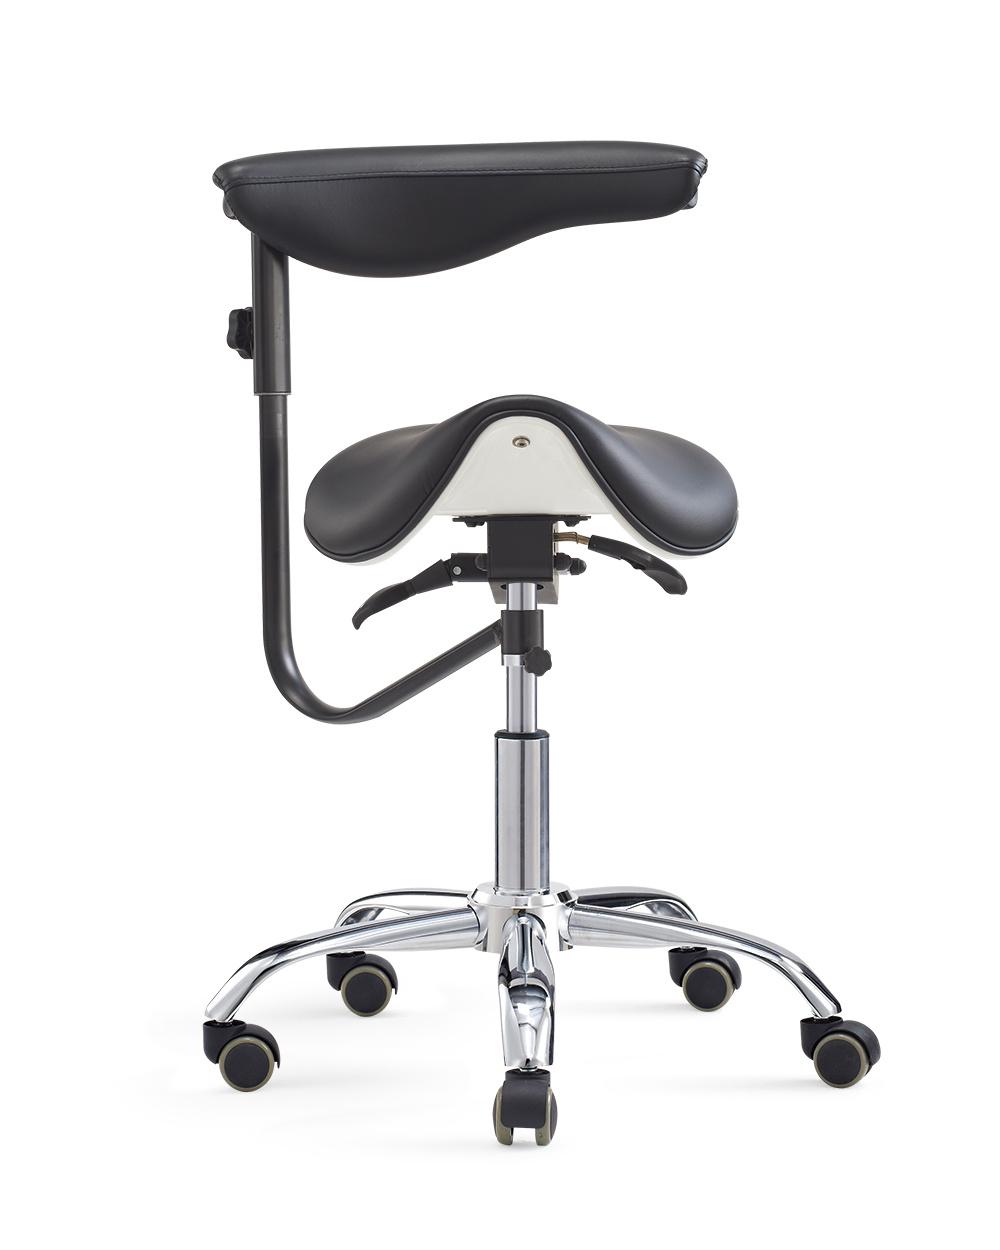 New Design Saddle Seat Stool Office Chair with Adjustable Swivel Backrest